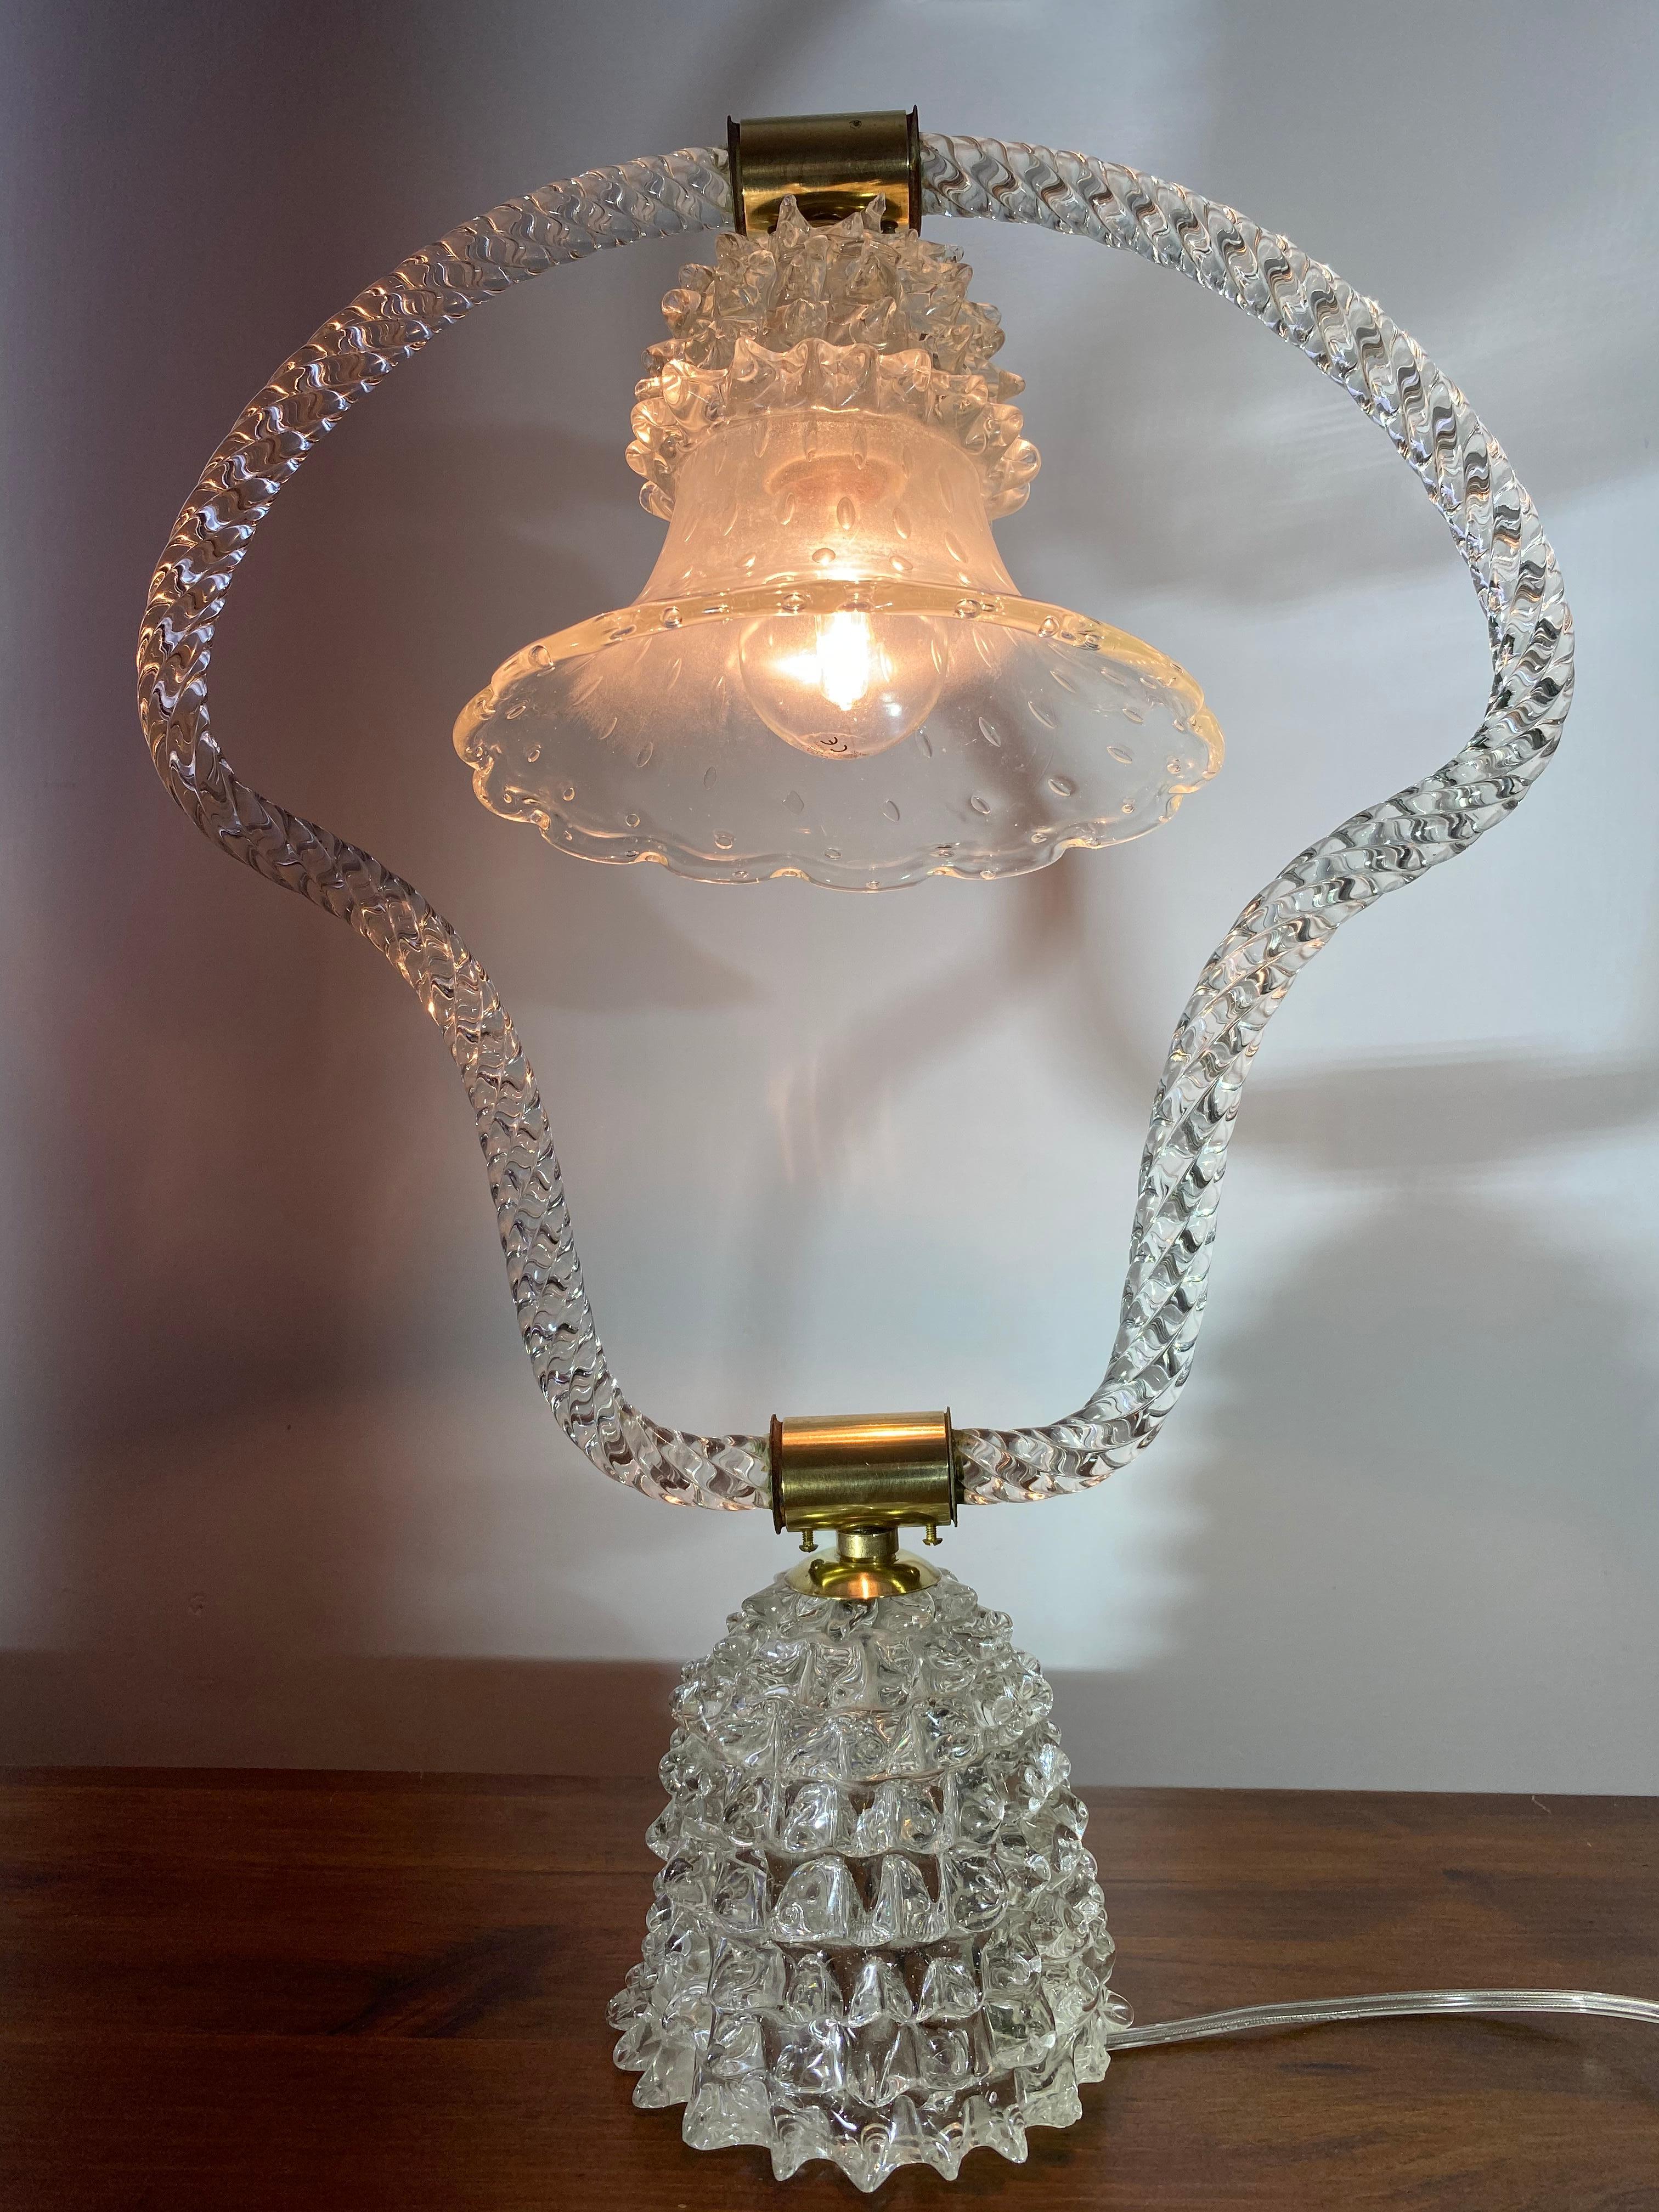 Art Deco Table Lamp by Ercole Barovier, Murano, 1940s For Sale 7